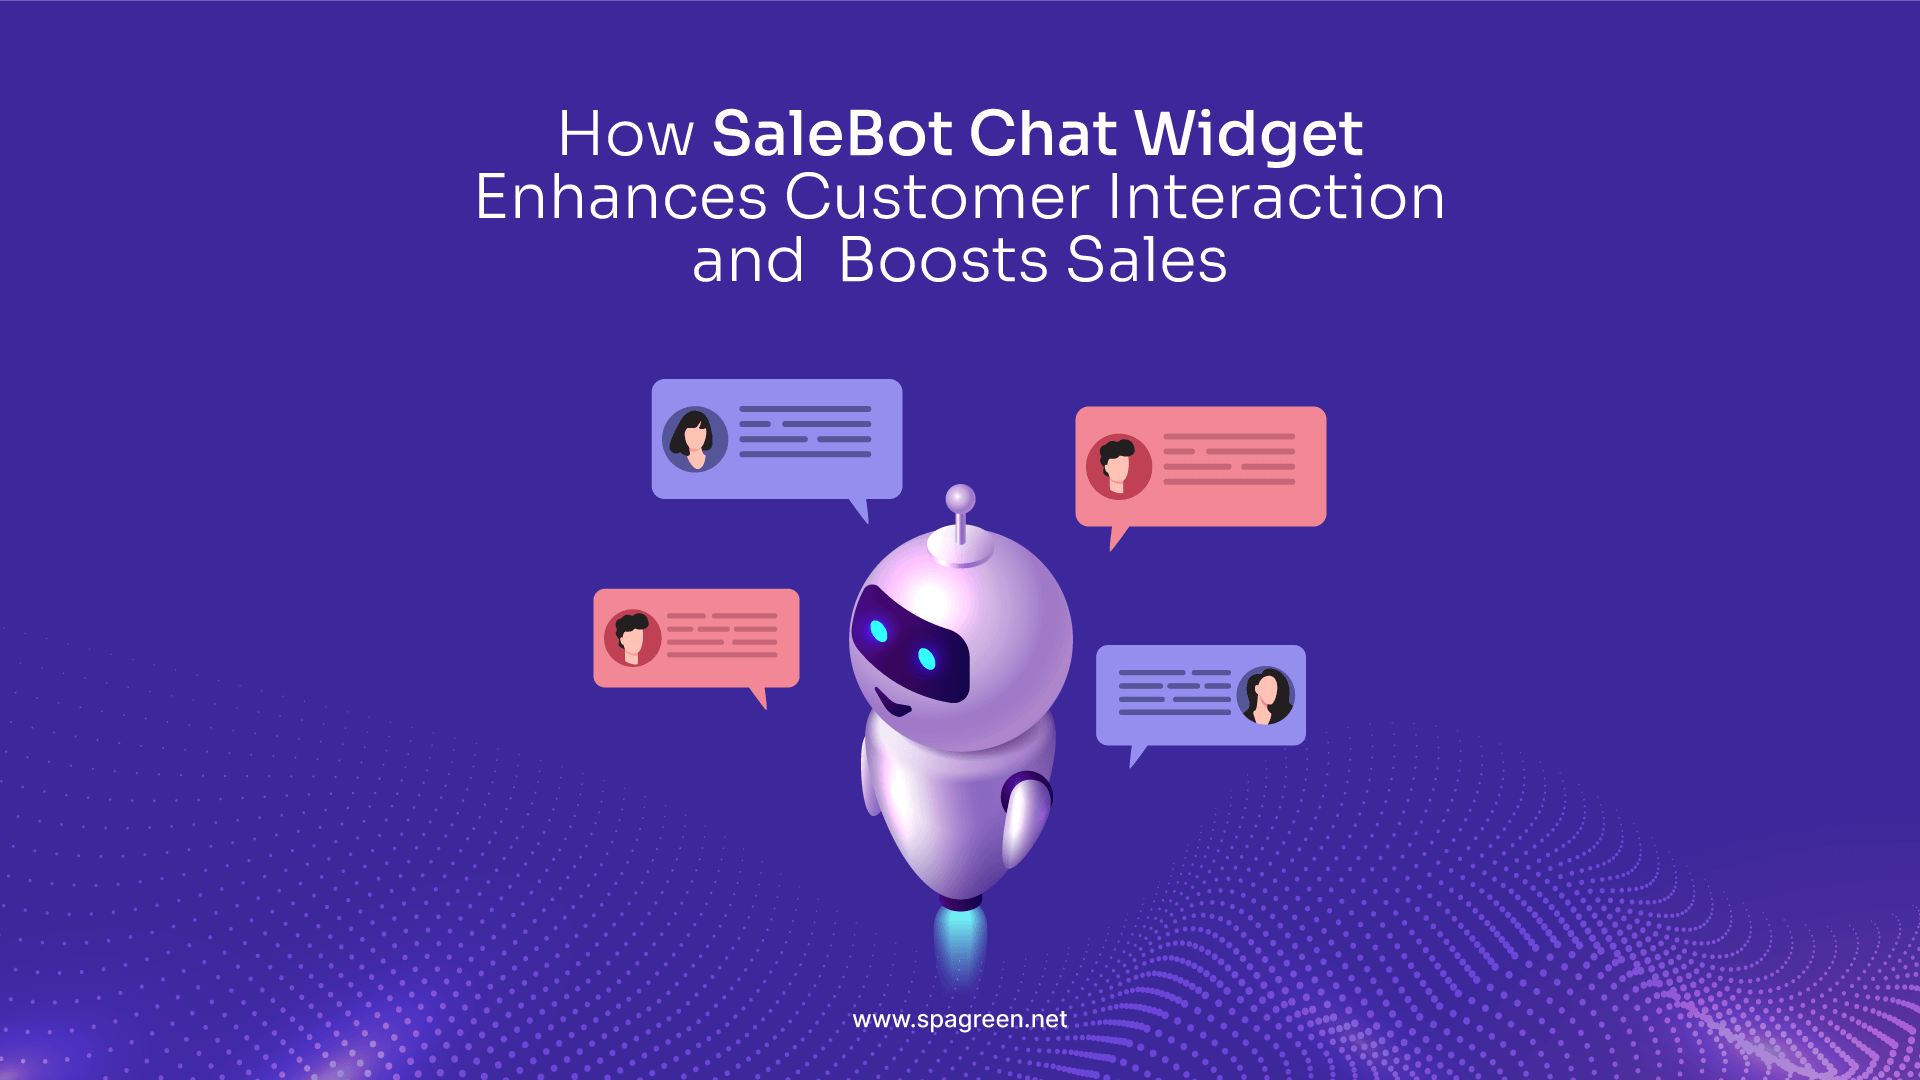 Boost Your Sales and Enhance Customer Interaction with SaleBot Chat Widget